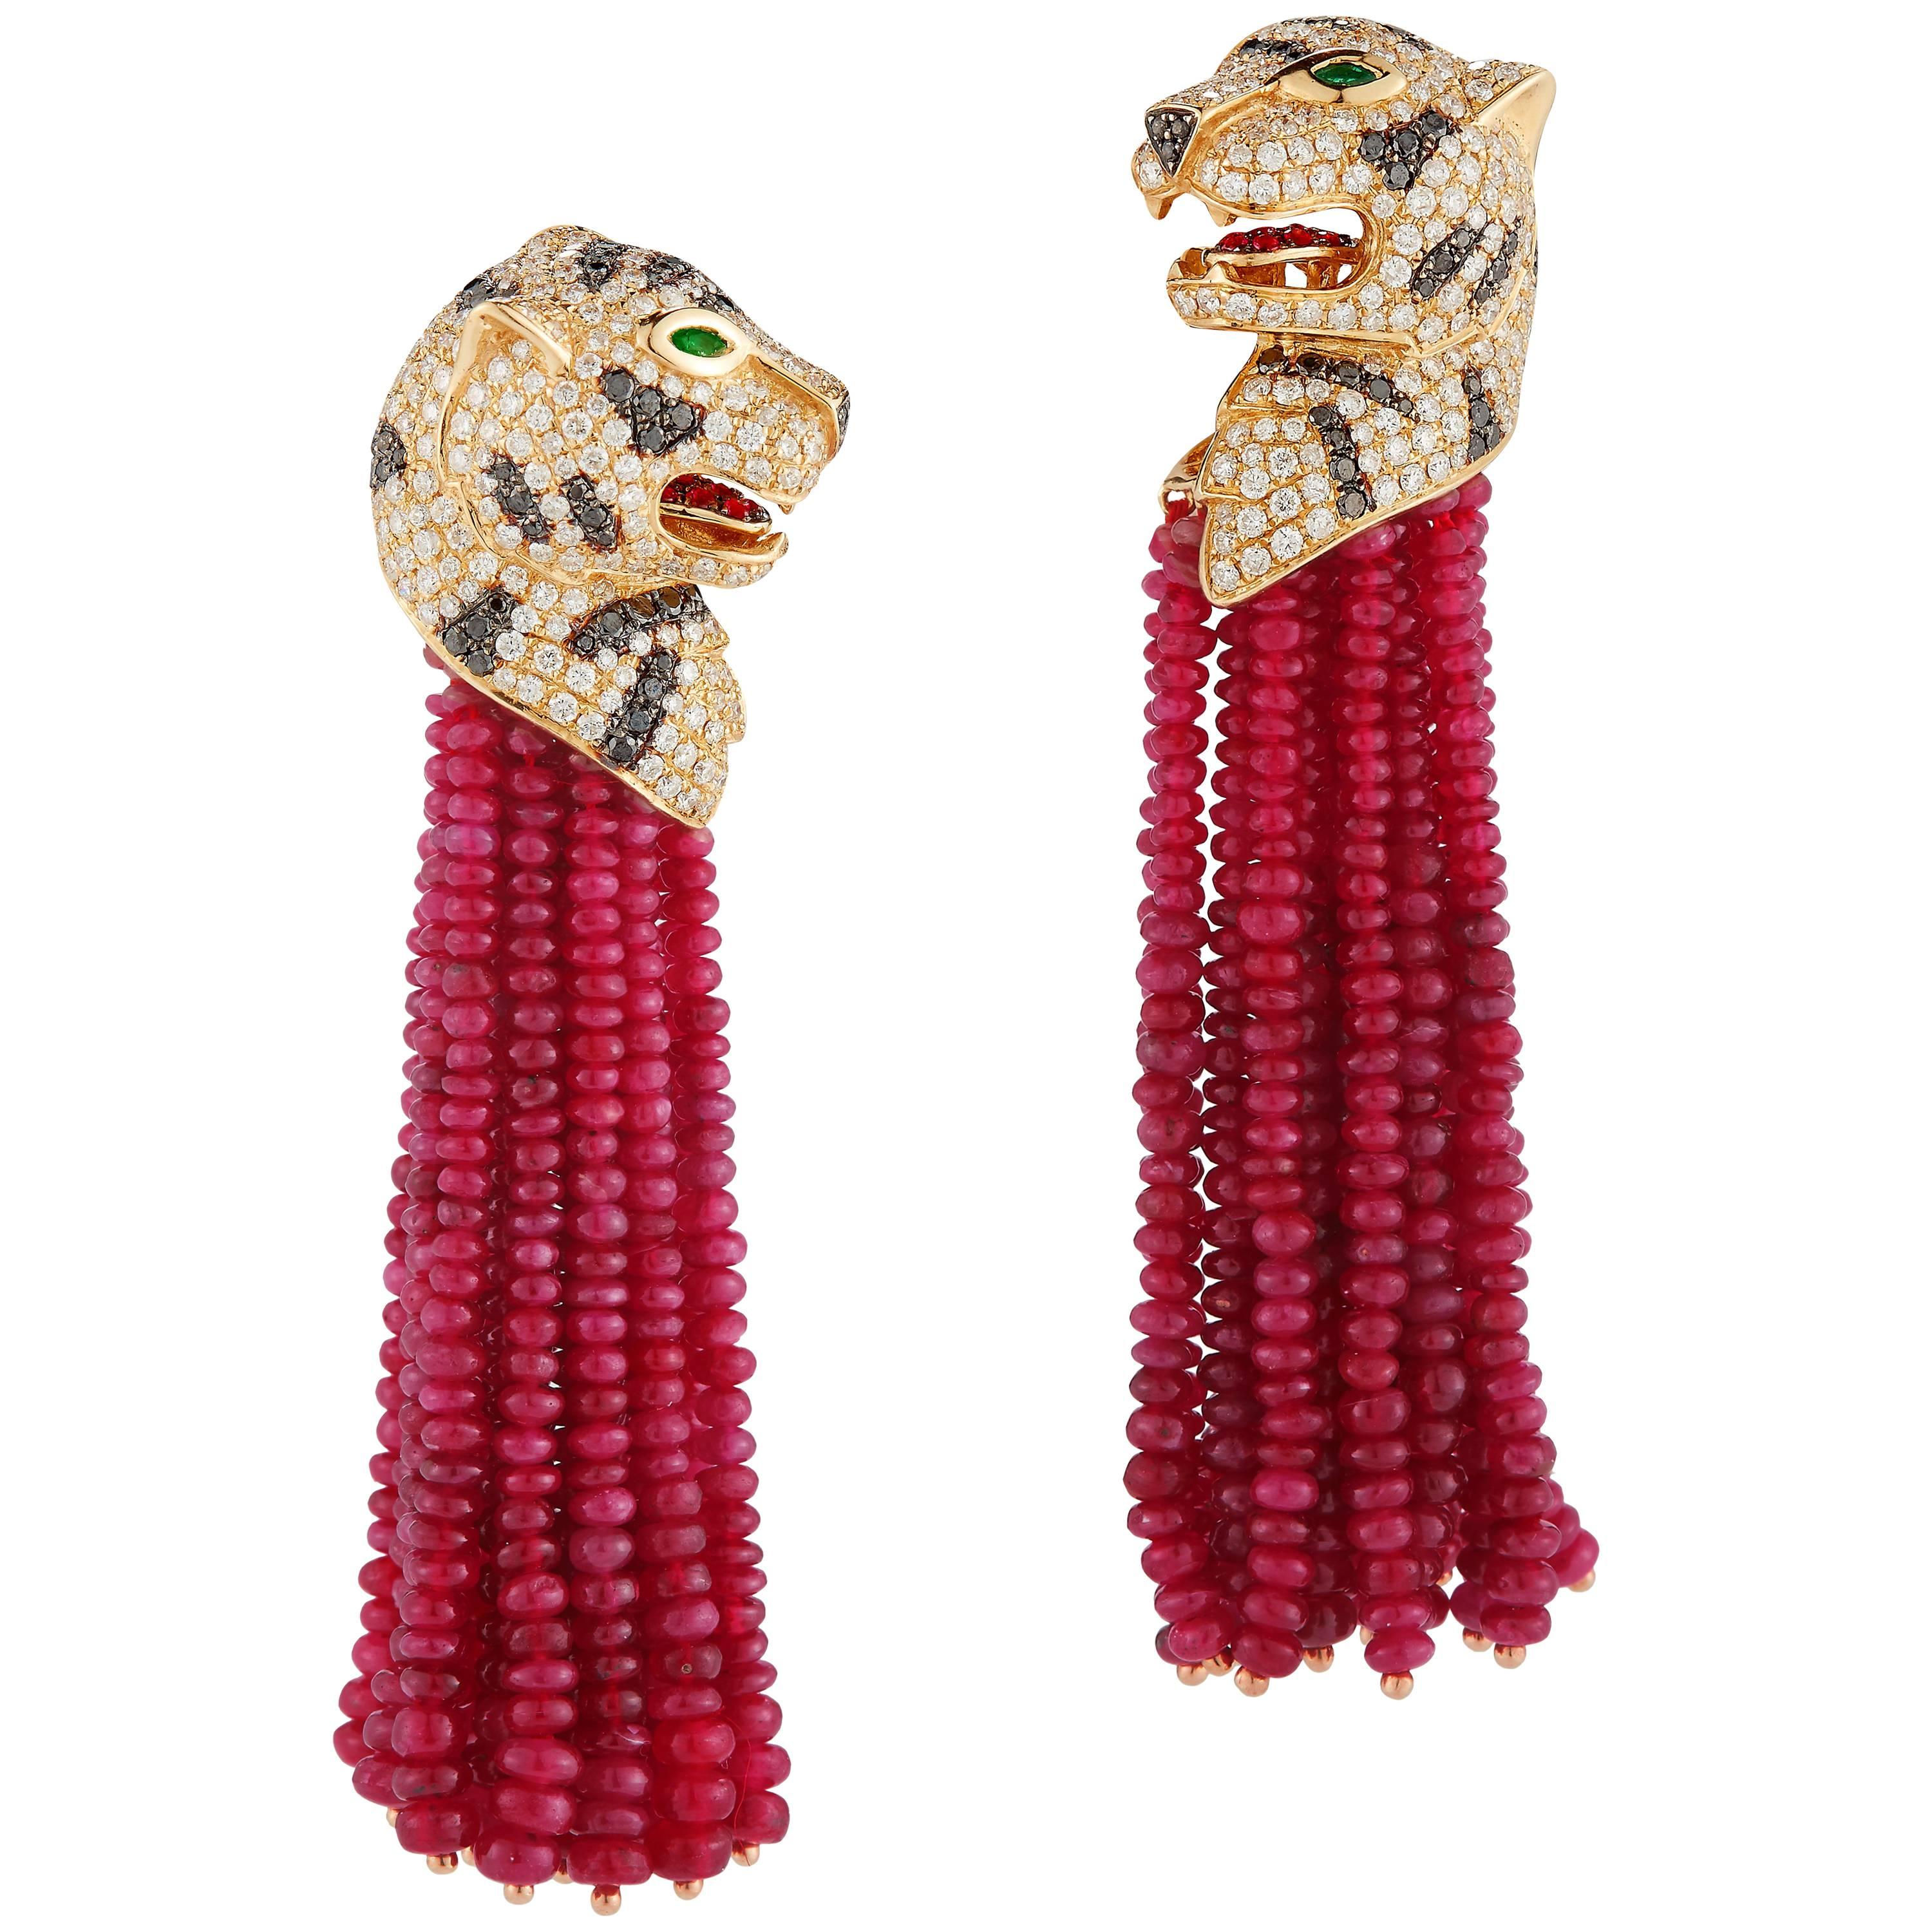 Magnificent Diamond and Ruby Earrings